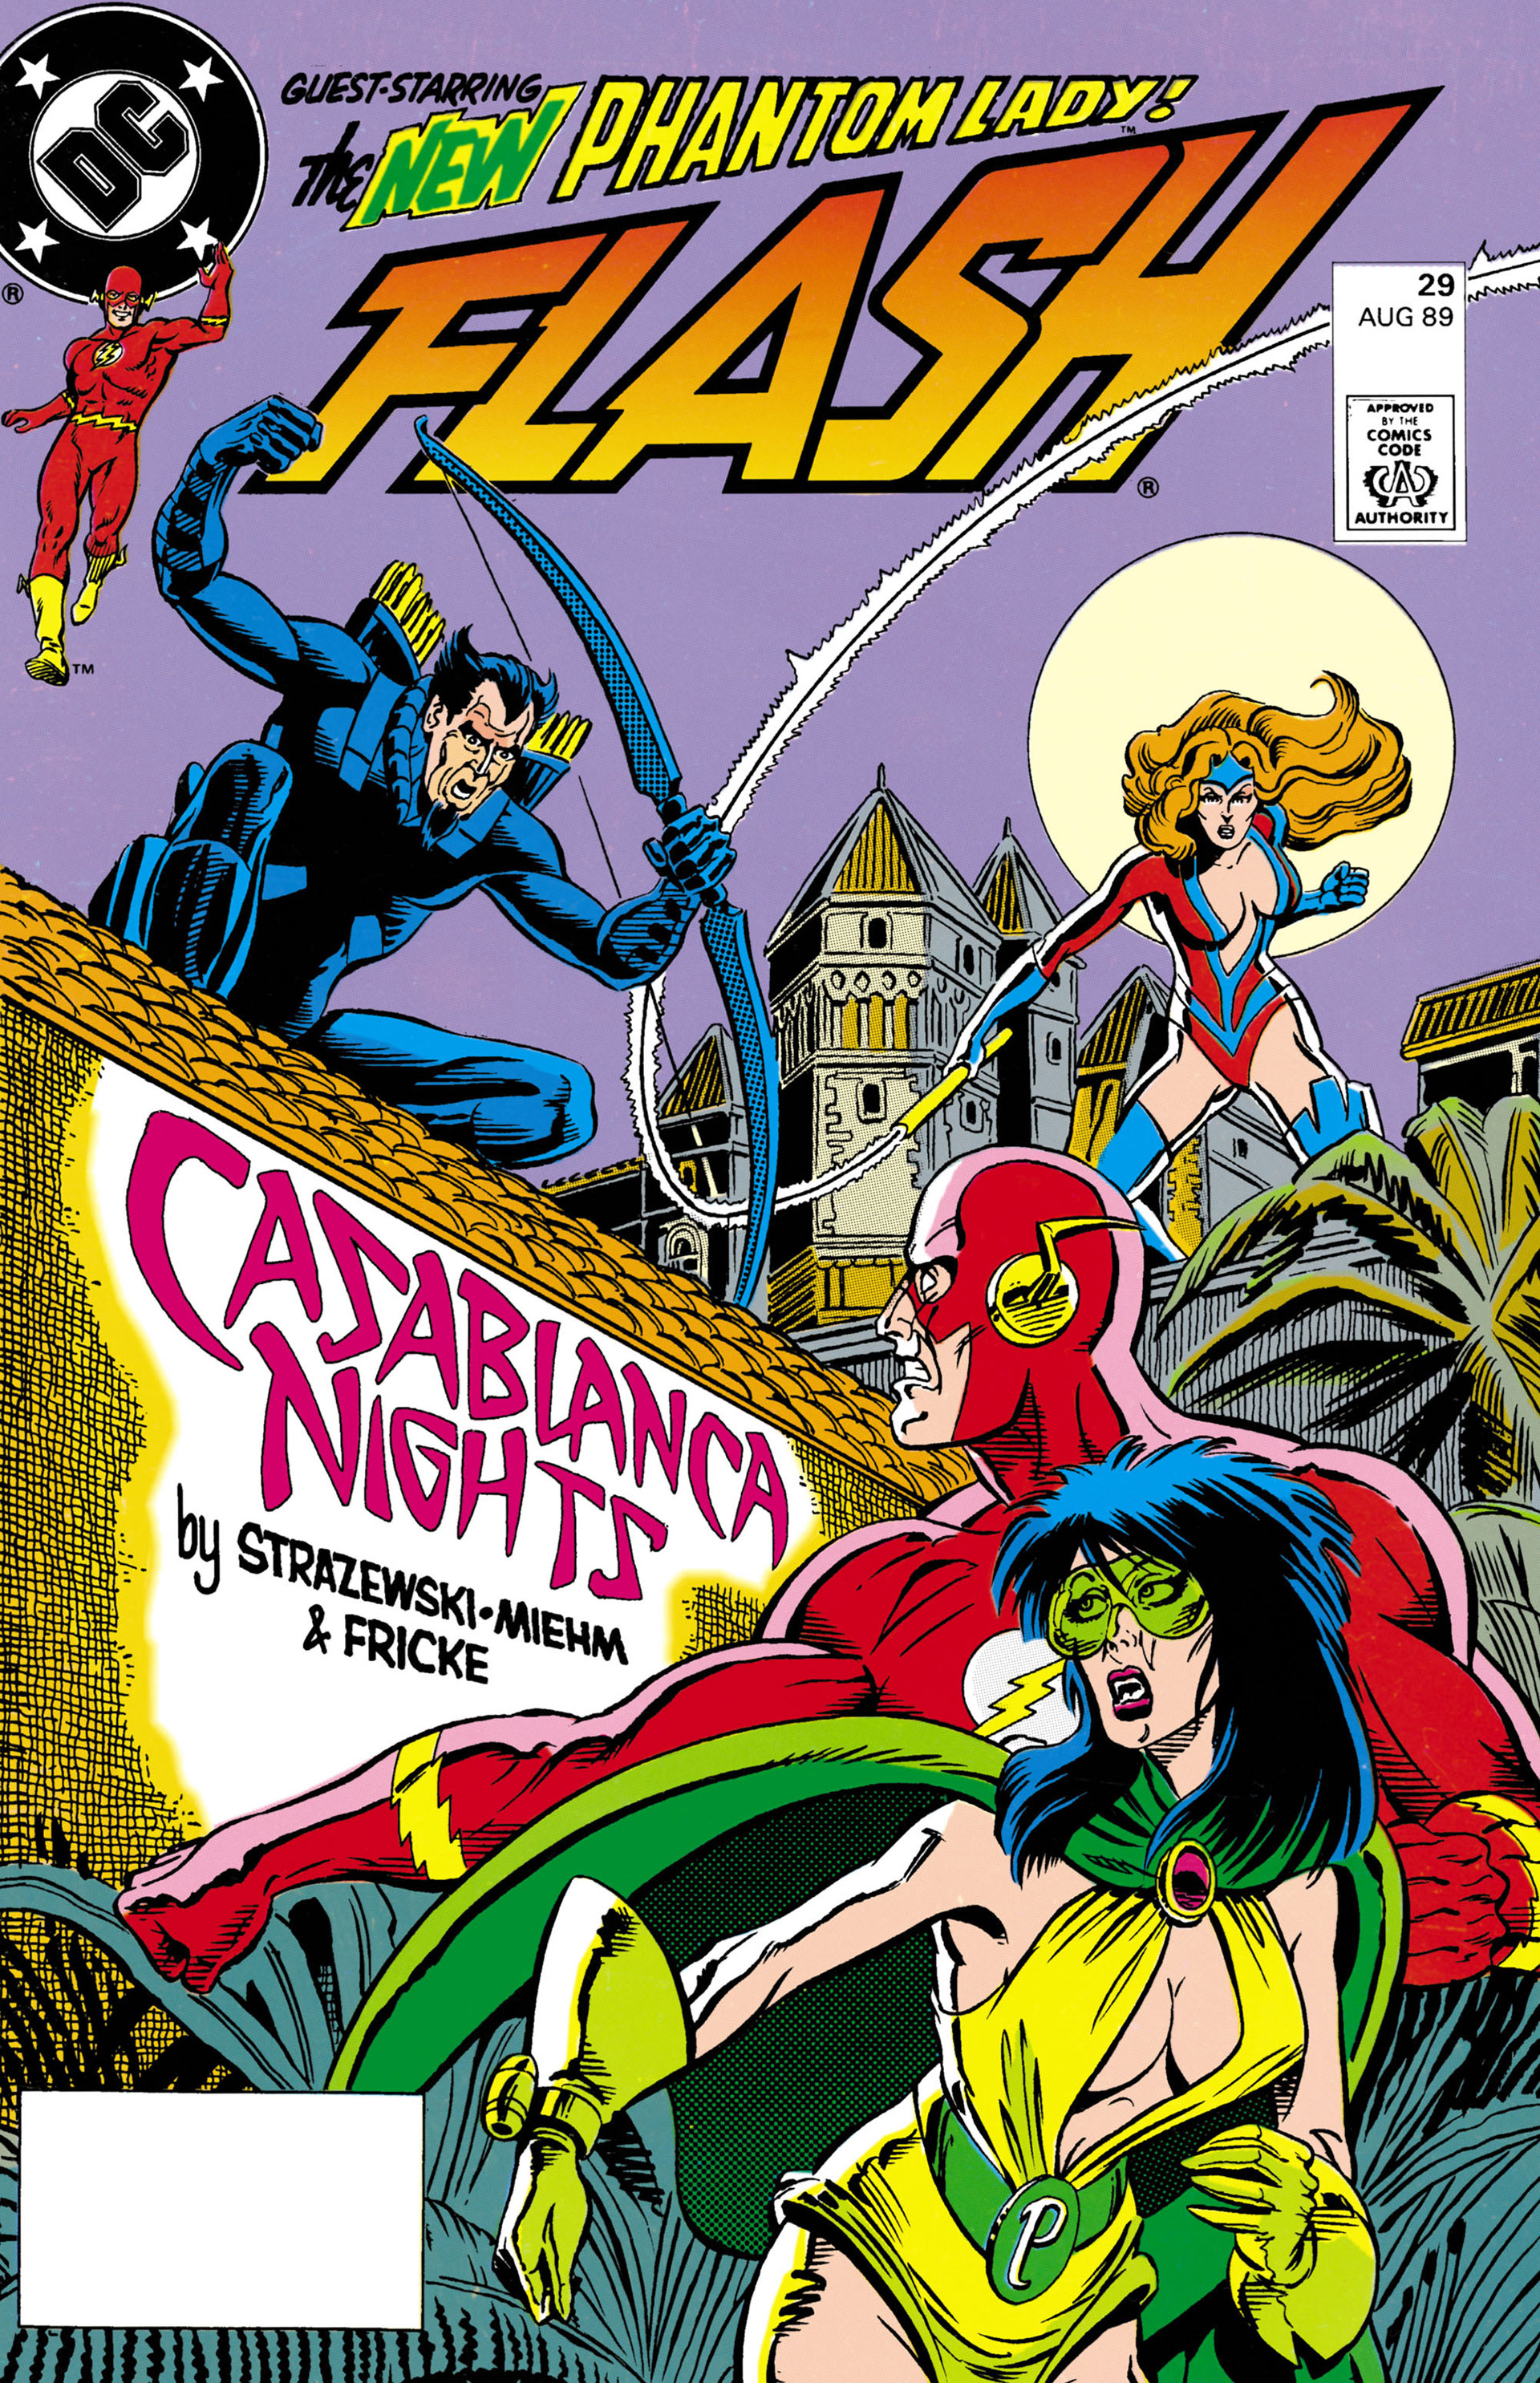 Read online The Flash (1987) comic -  Issue #29 - 1